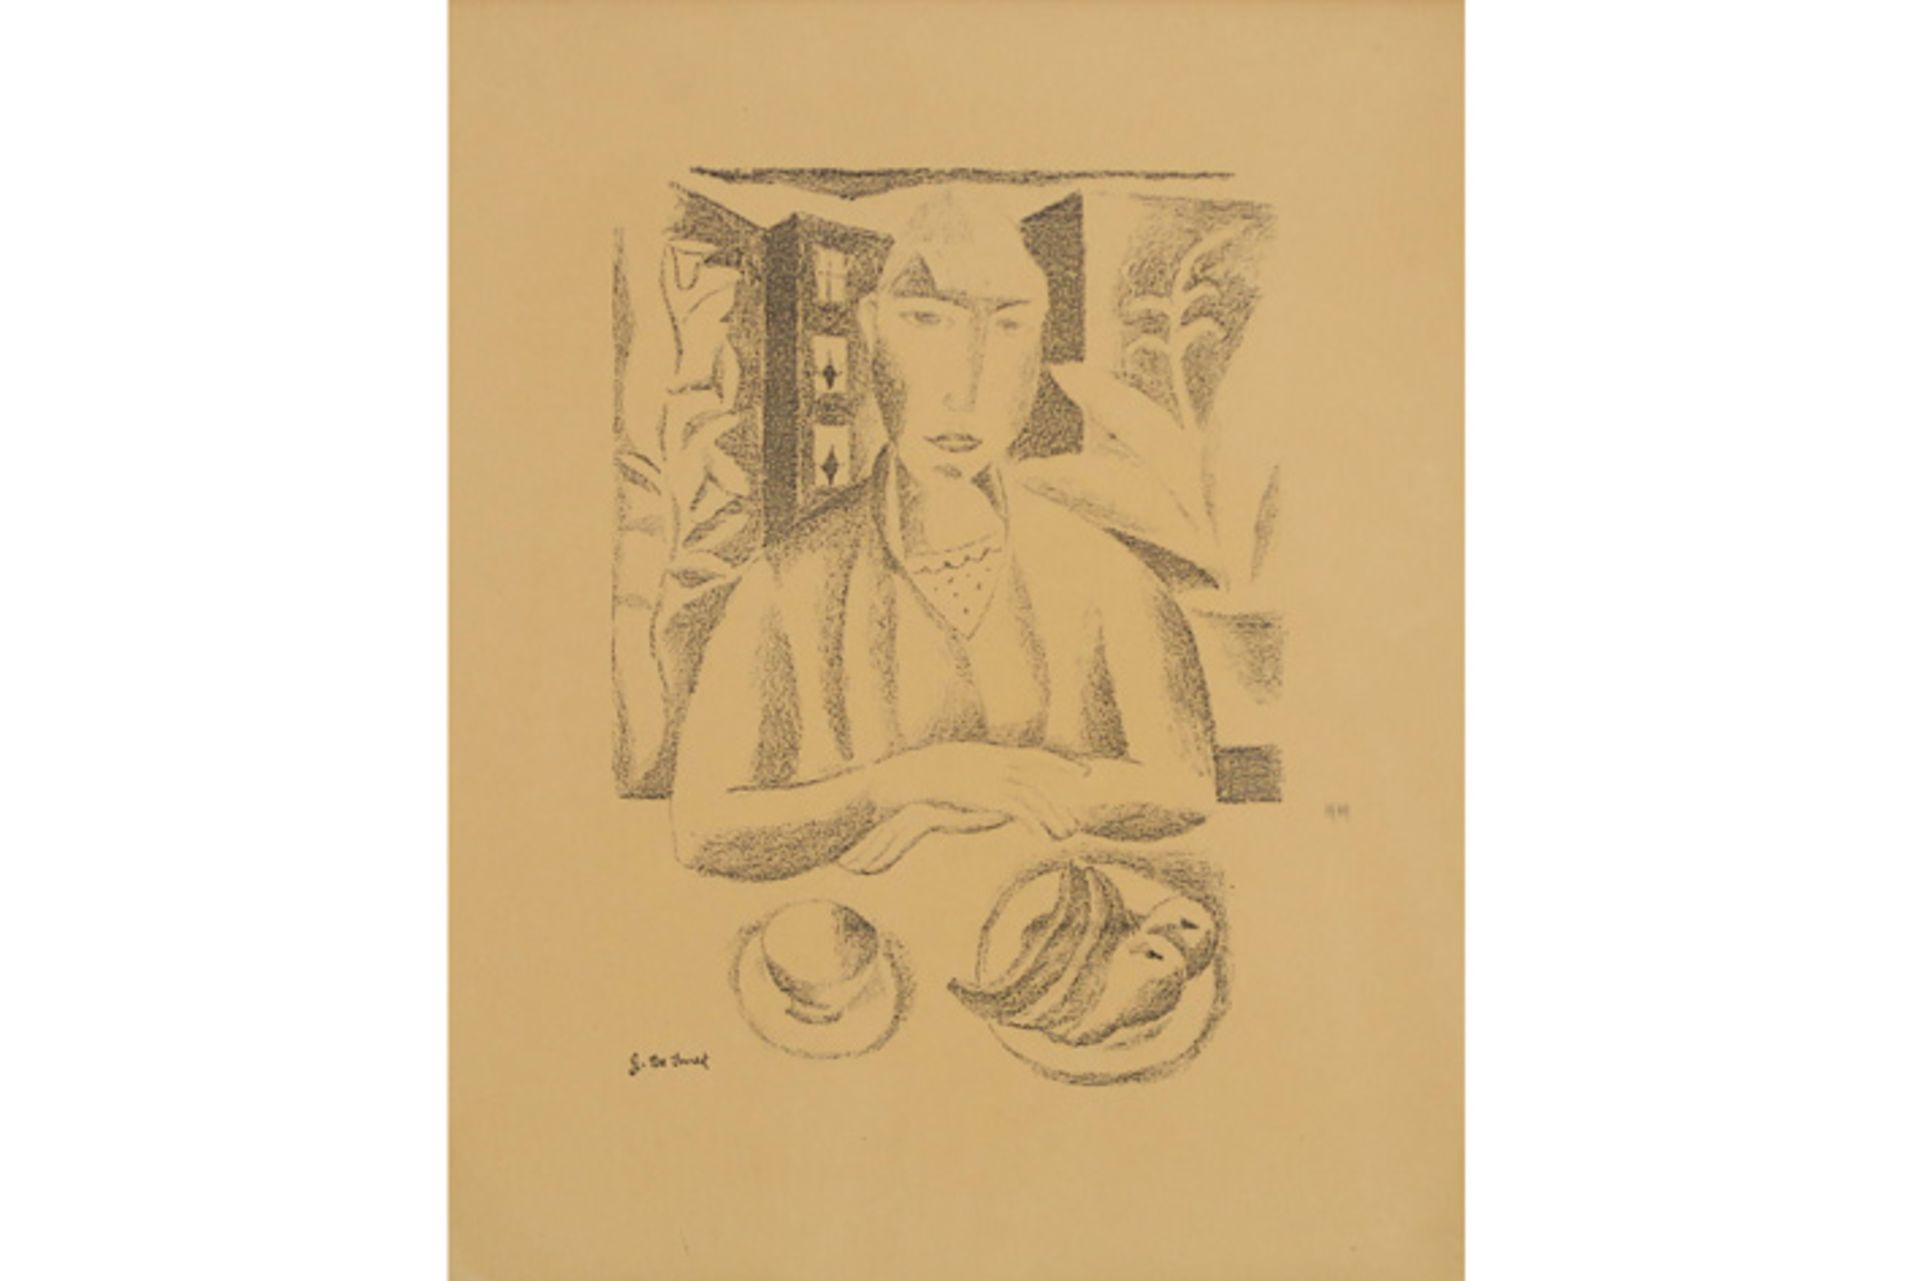 lithograph - signed Gust(ave) De Smet in the print || DE SMET GUST(AVE) (1877 - 1943) litho : "Vrouw